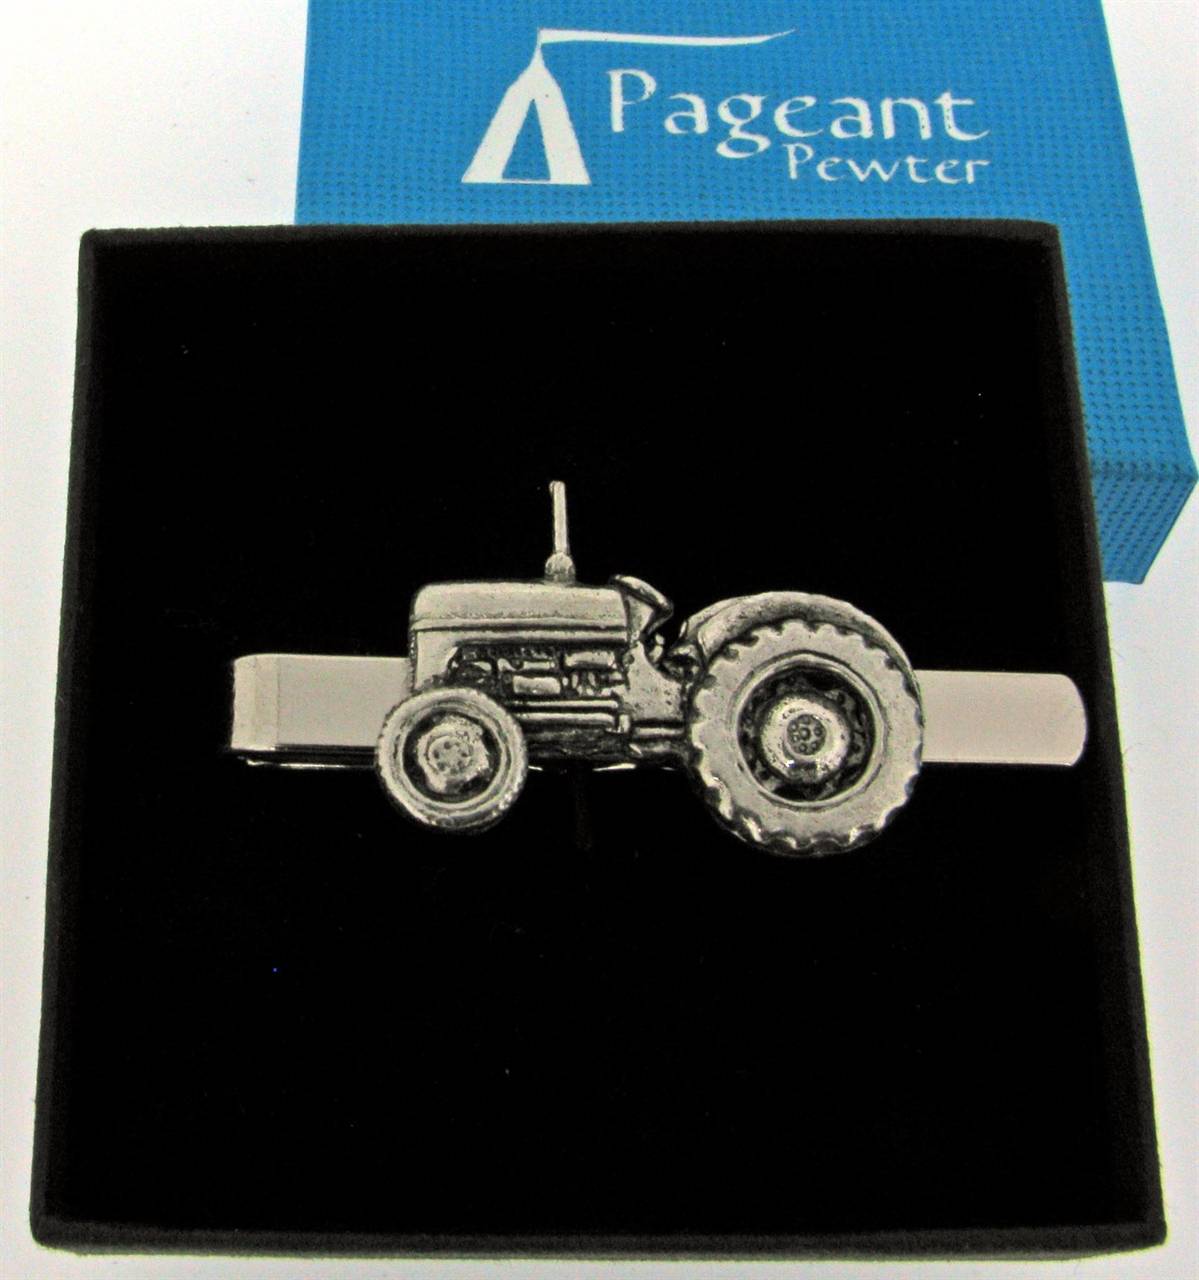 Tractor Tie Clip - high quality pewter gifts from Pageant Pewter